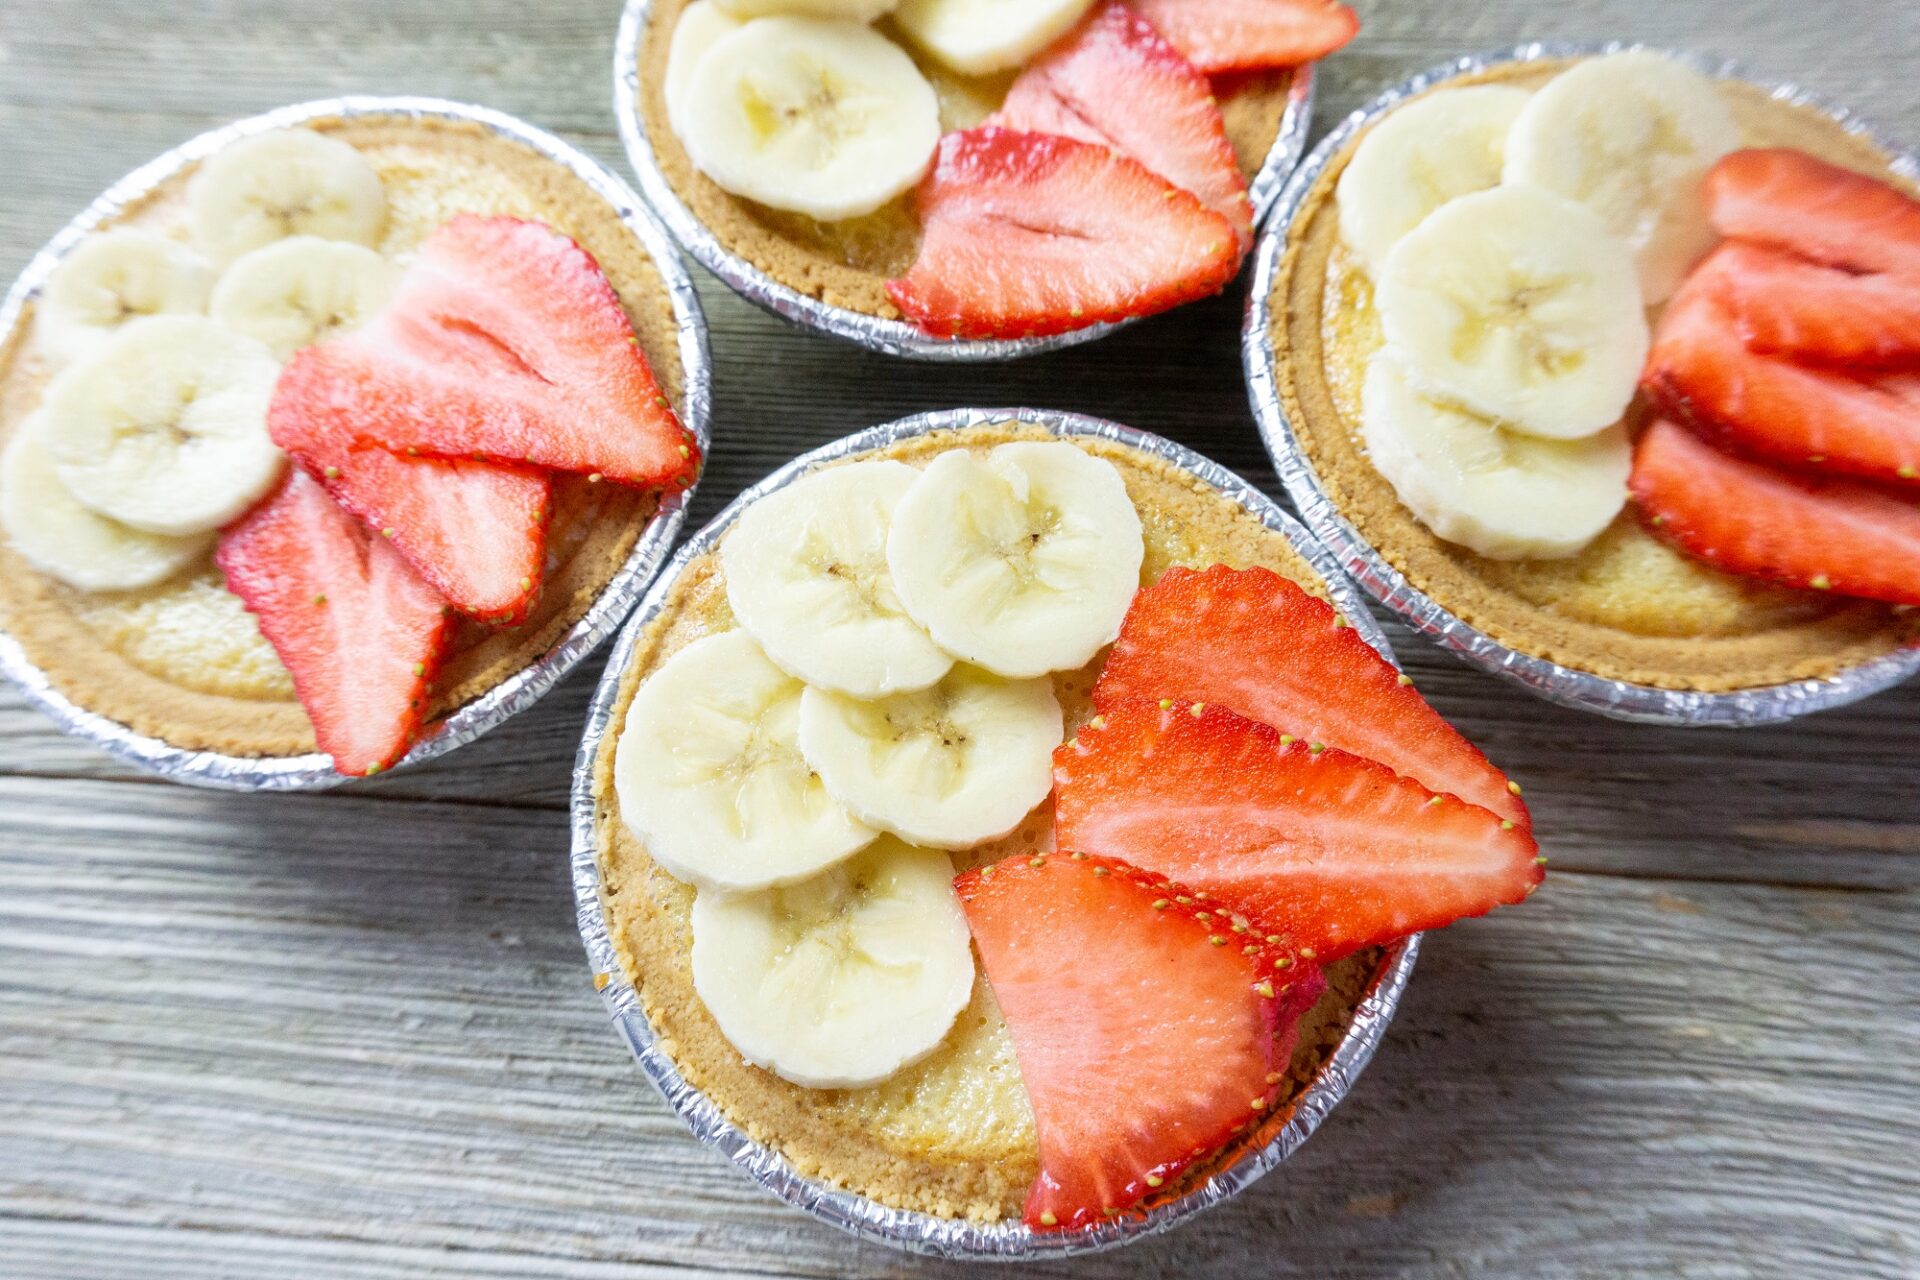 Mini Fruit Tarts with banana and strawberry slices on a wood table